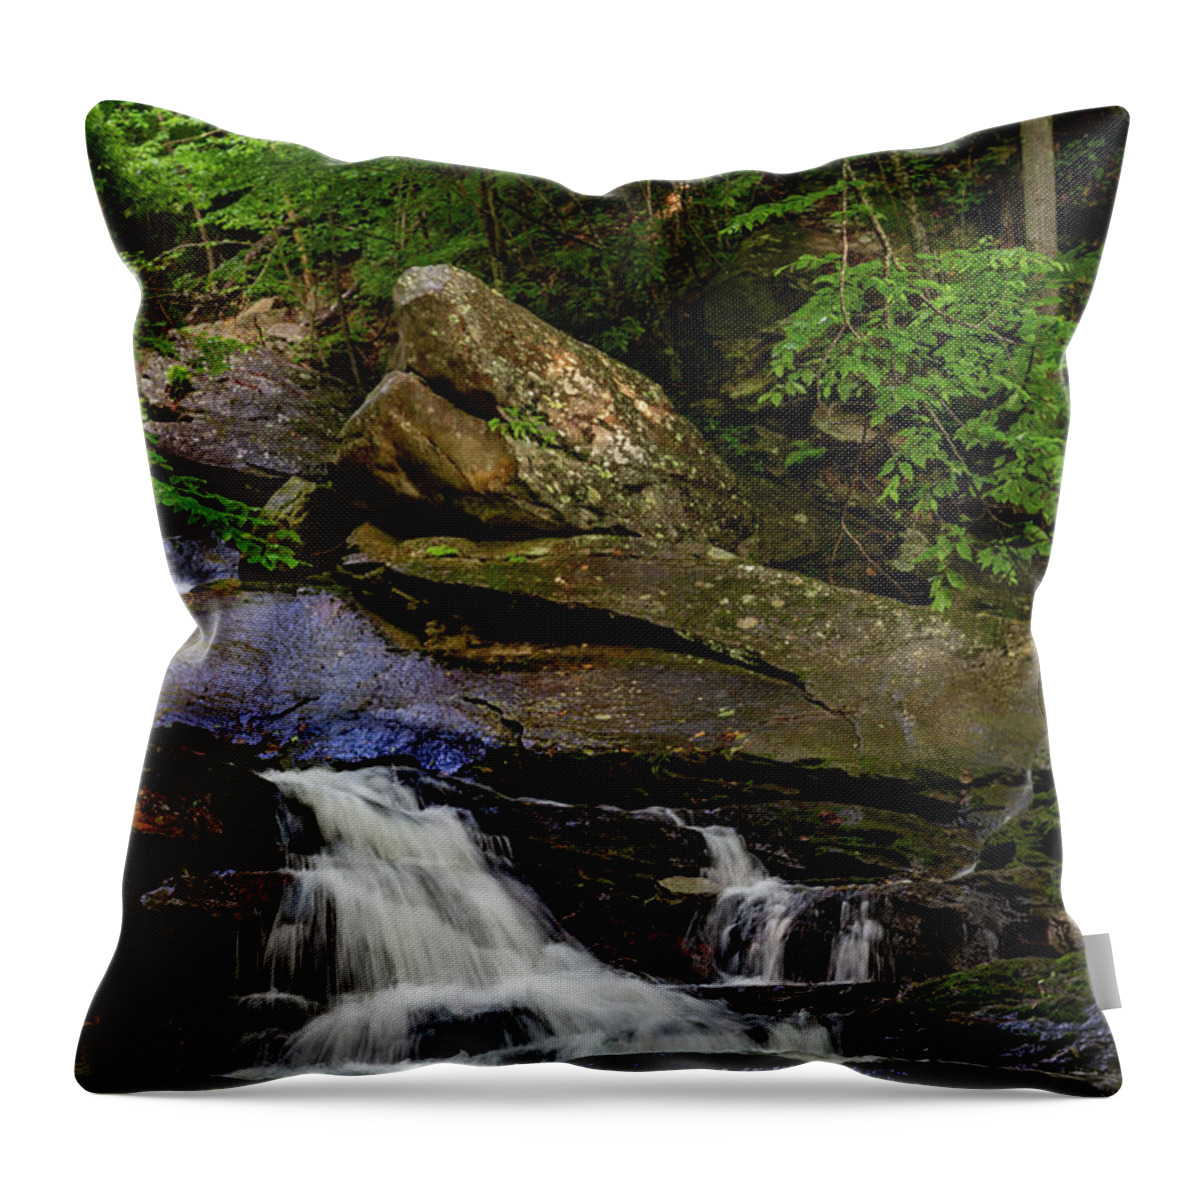 Crab Orchard Falls Throw Pillow featuring the photograph Crab Orchard Falls 2 by Cindy Robinson